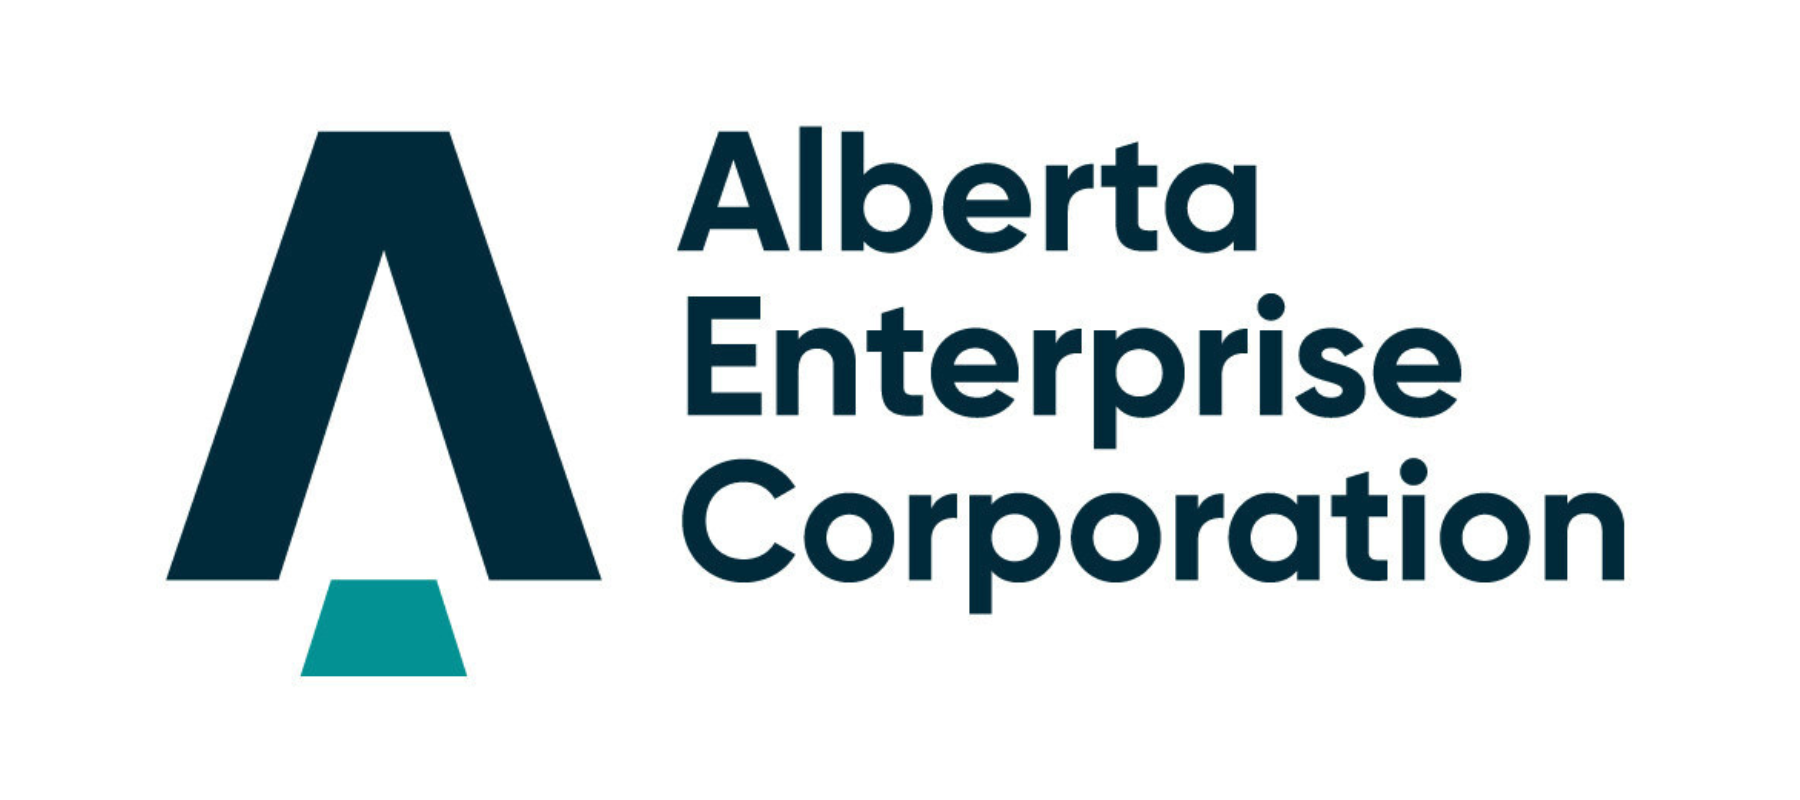 Alberta Enterprise Corporation invests $10m in McRock Capital Fund III to support early-stage tech startups